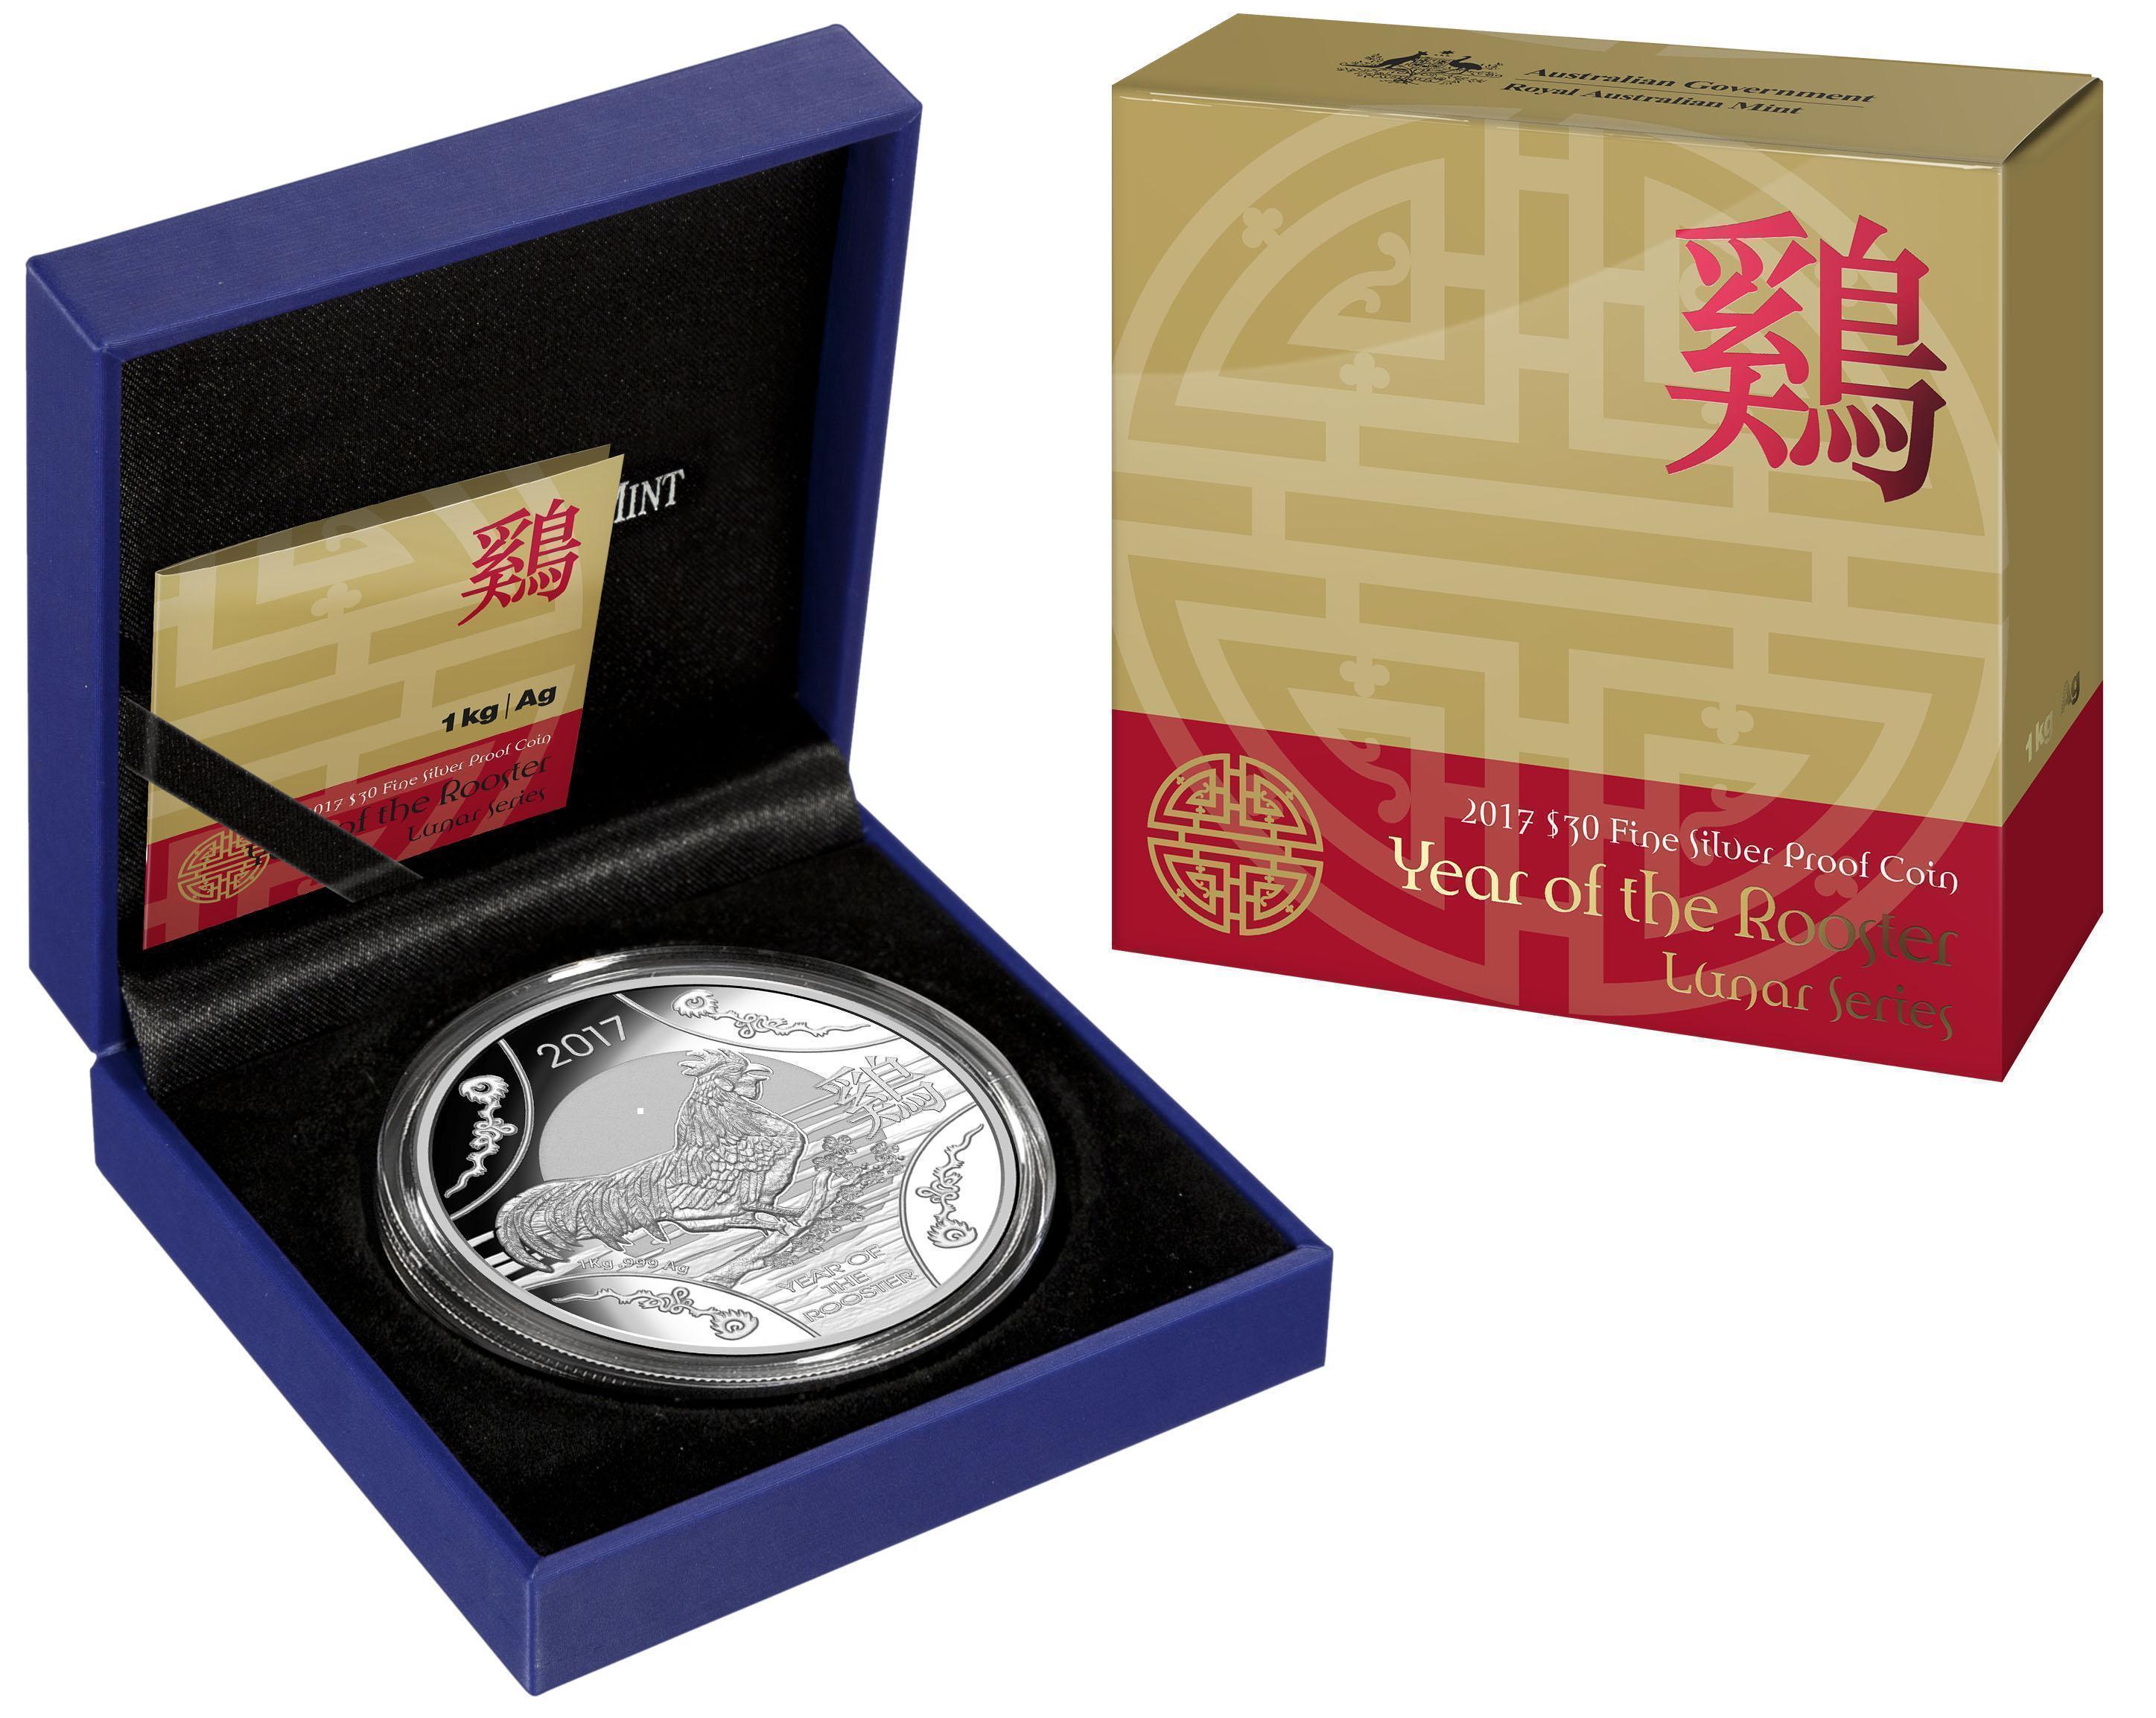 2017 $30 1kg Fine Silver Proof Coin Year of the Rooster Lunar Series Royal Australian Mint RAM